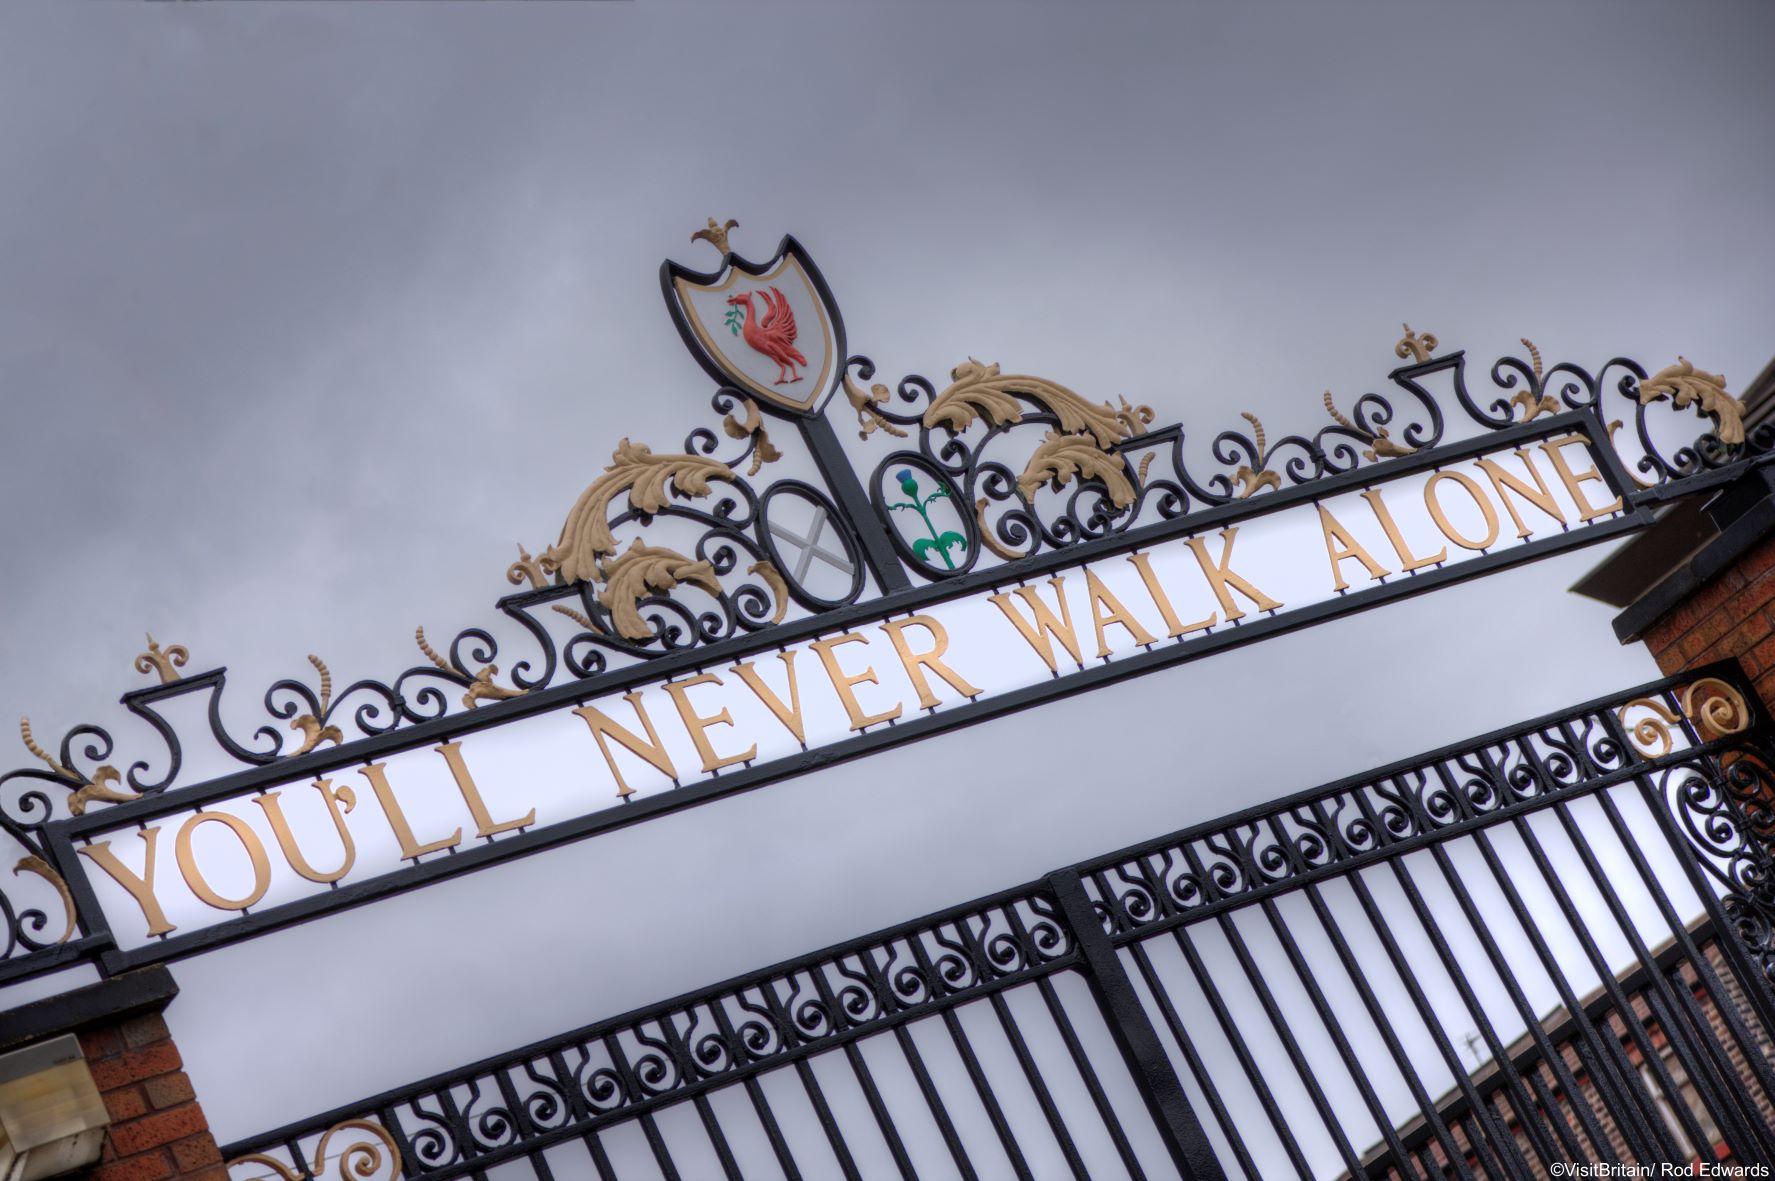 Shankly Gate beim Liverpooler FC: You'll never walk alone" 